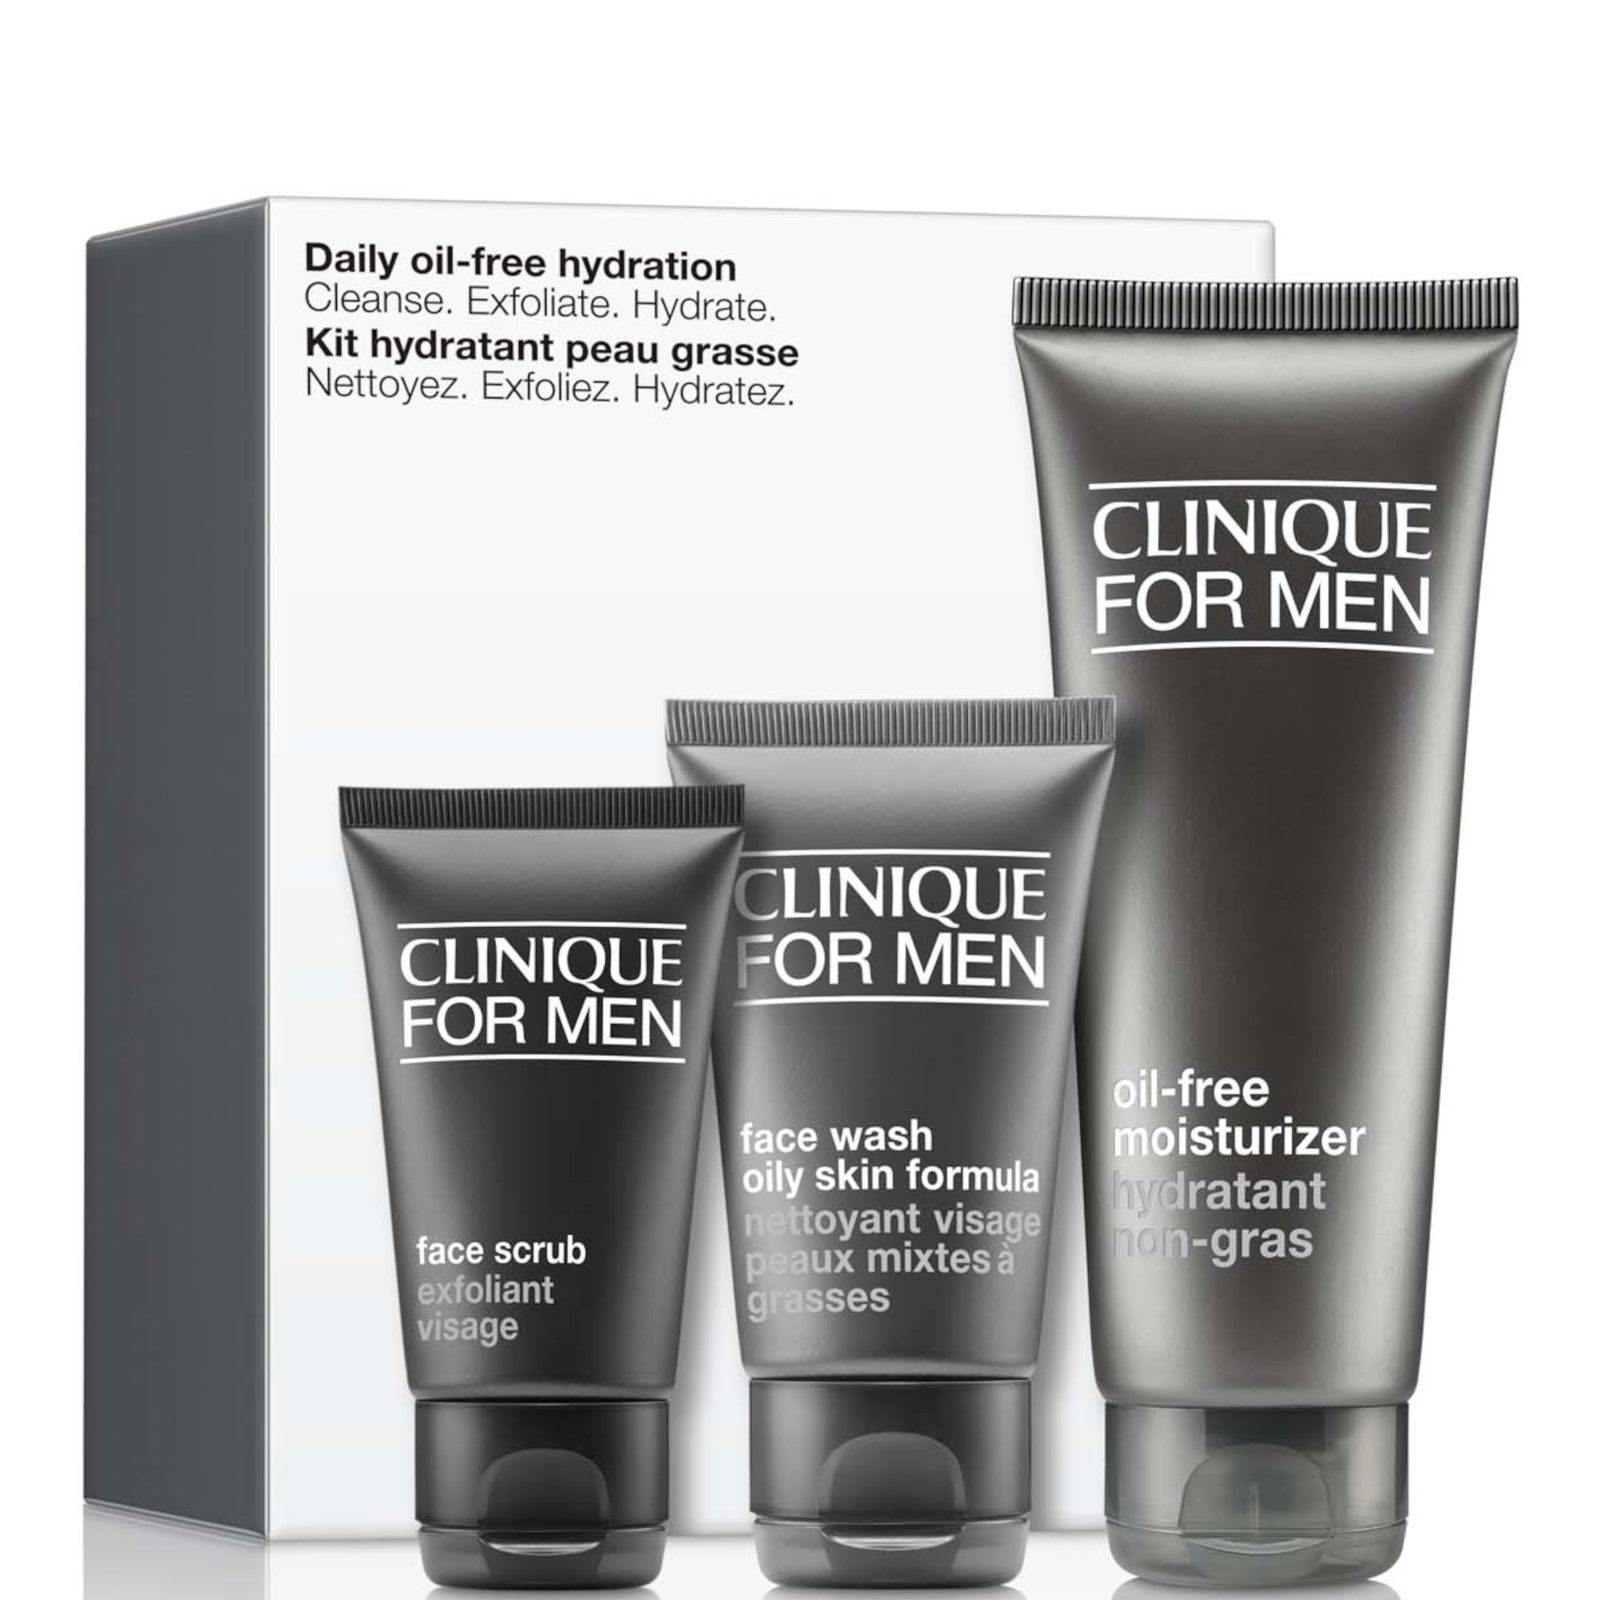 Clinique For Men Daily Oil-free Hydration: Skincare Gift Set In Black